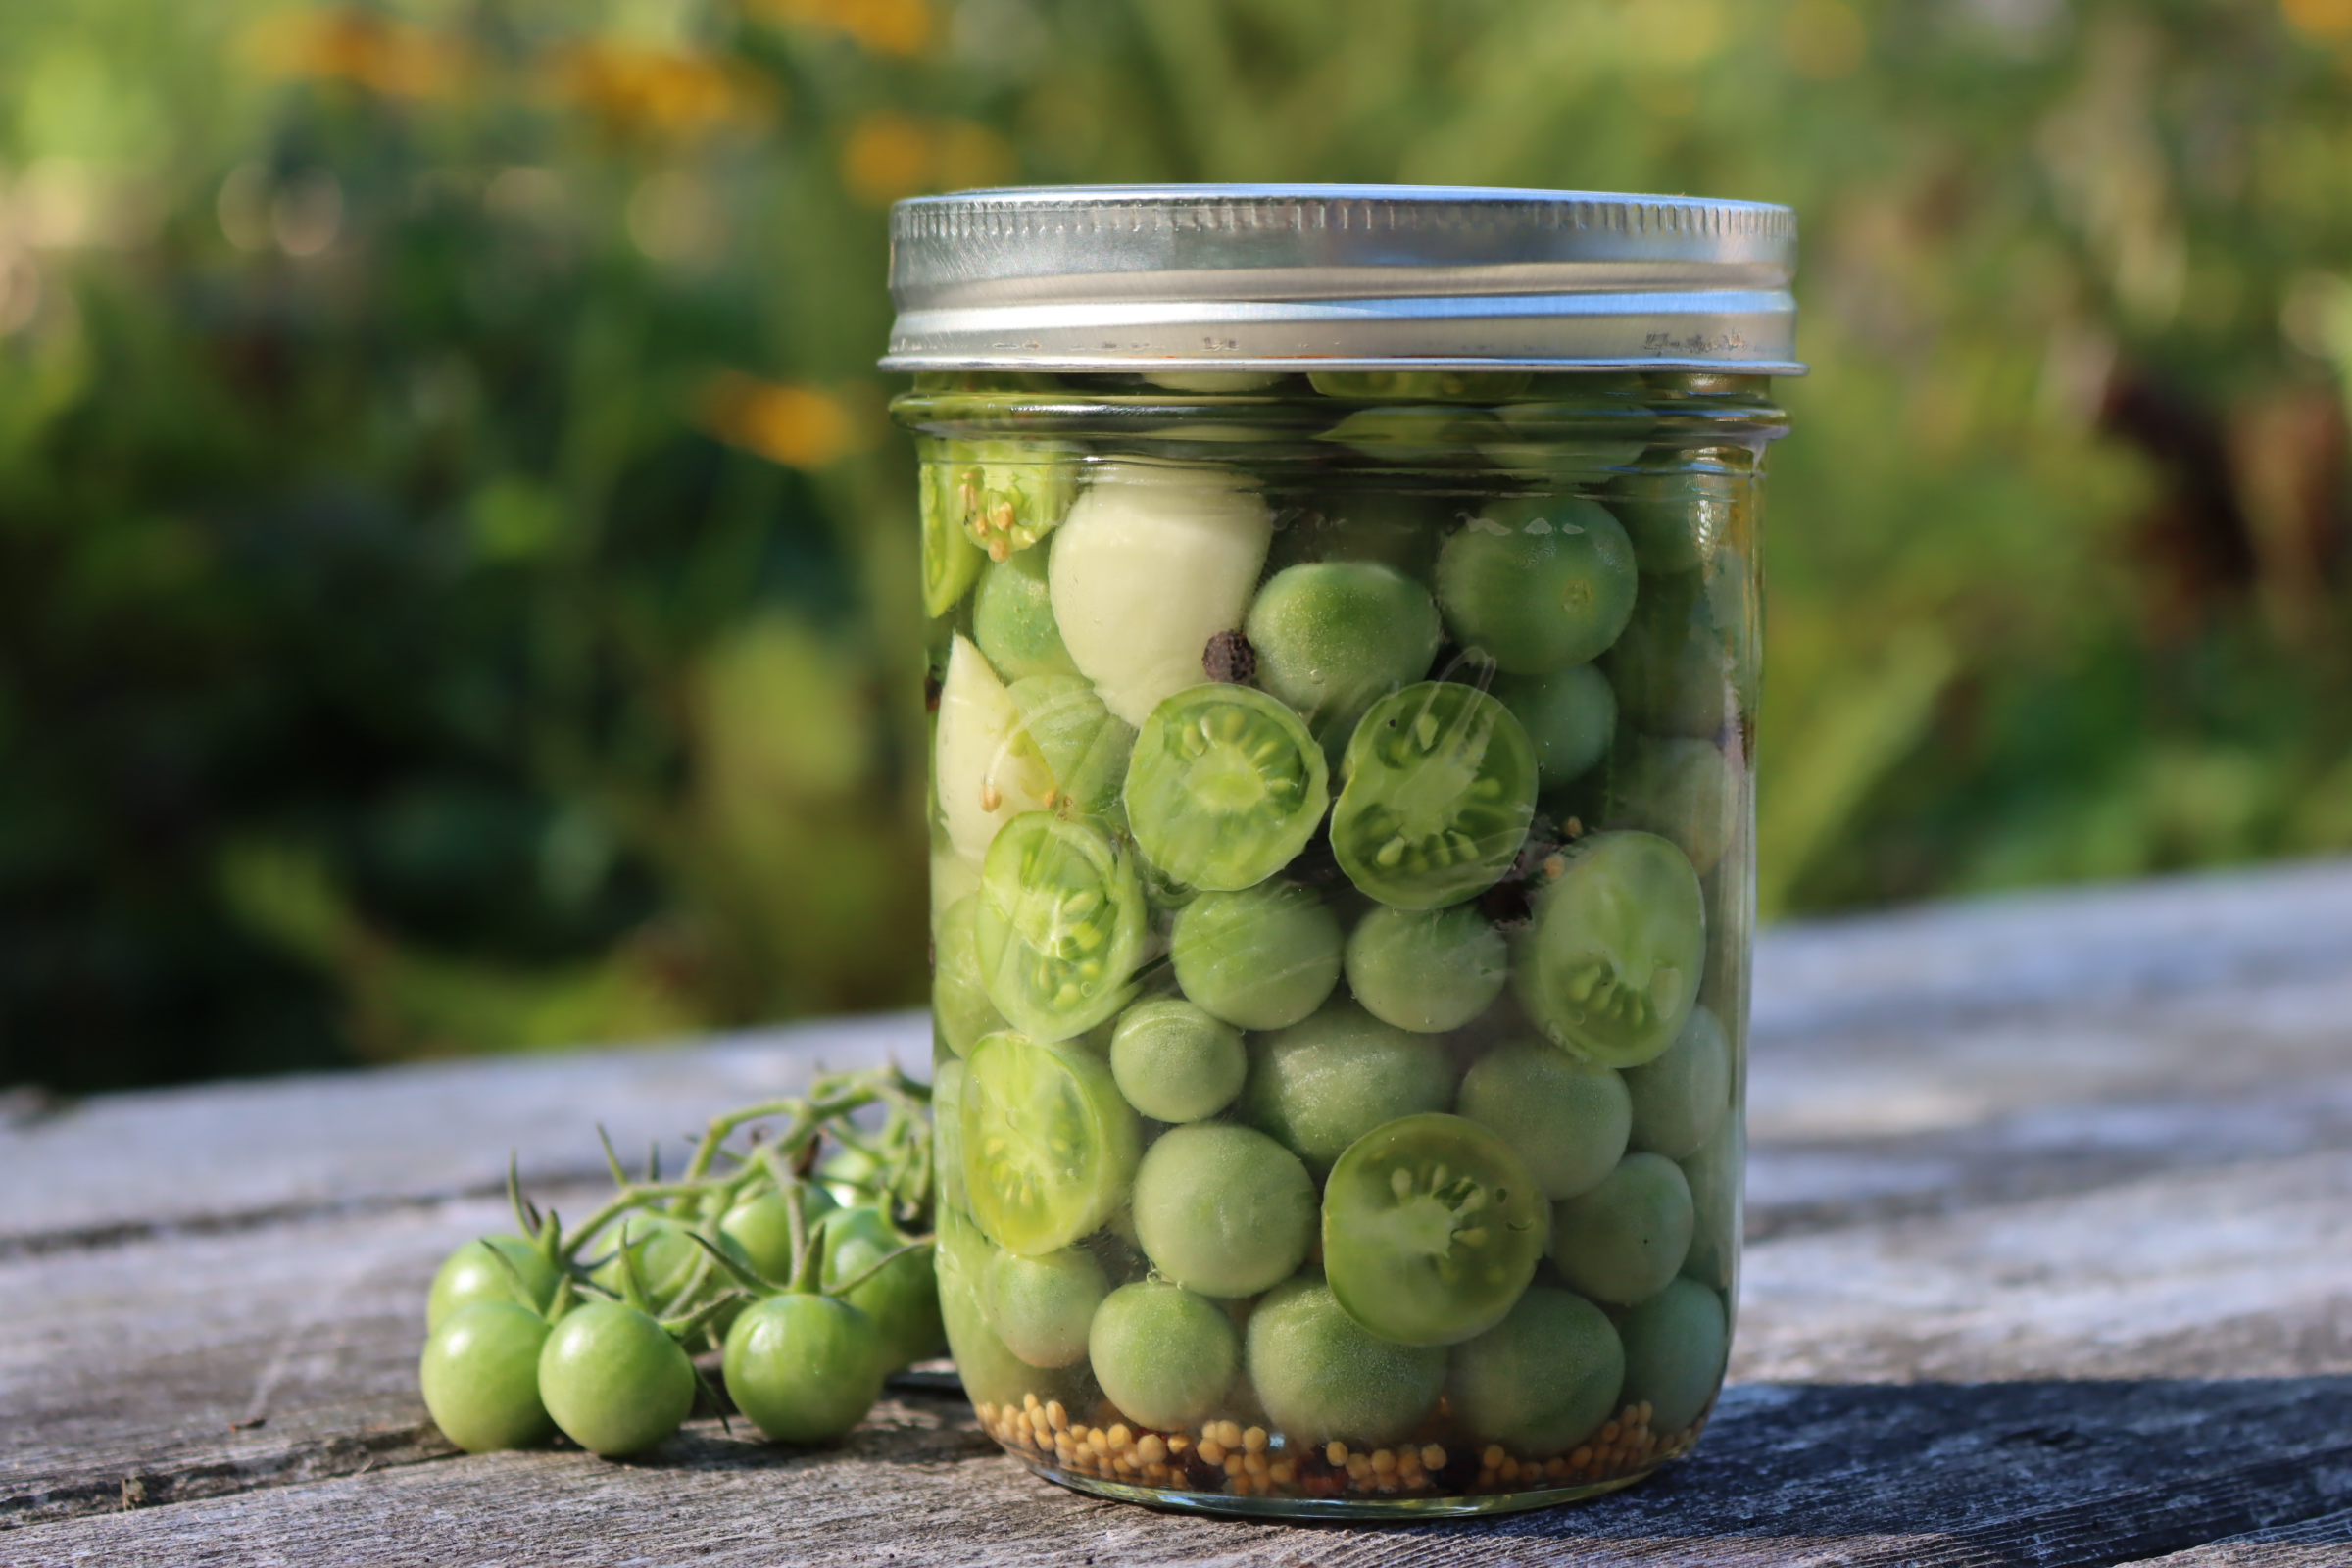 https://creativecanning.com/wp-content/uploads/2020/11/Pickled-Green-Tomatoes.jpg